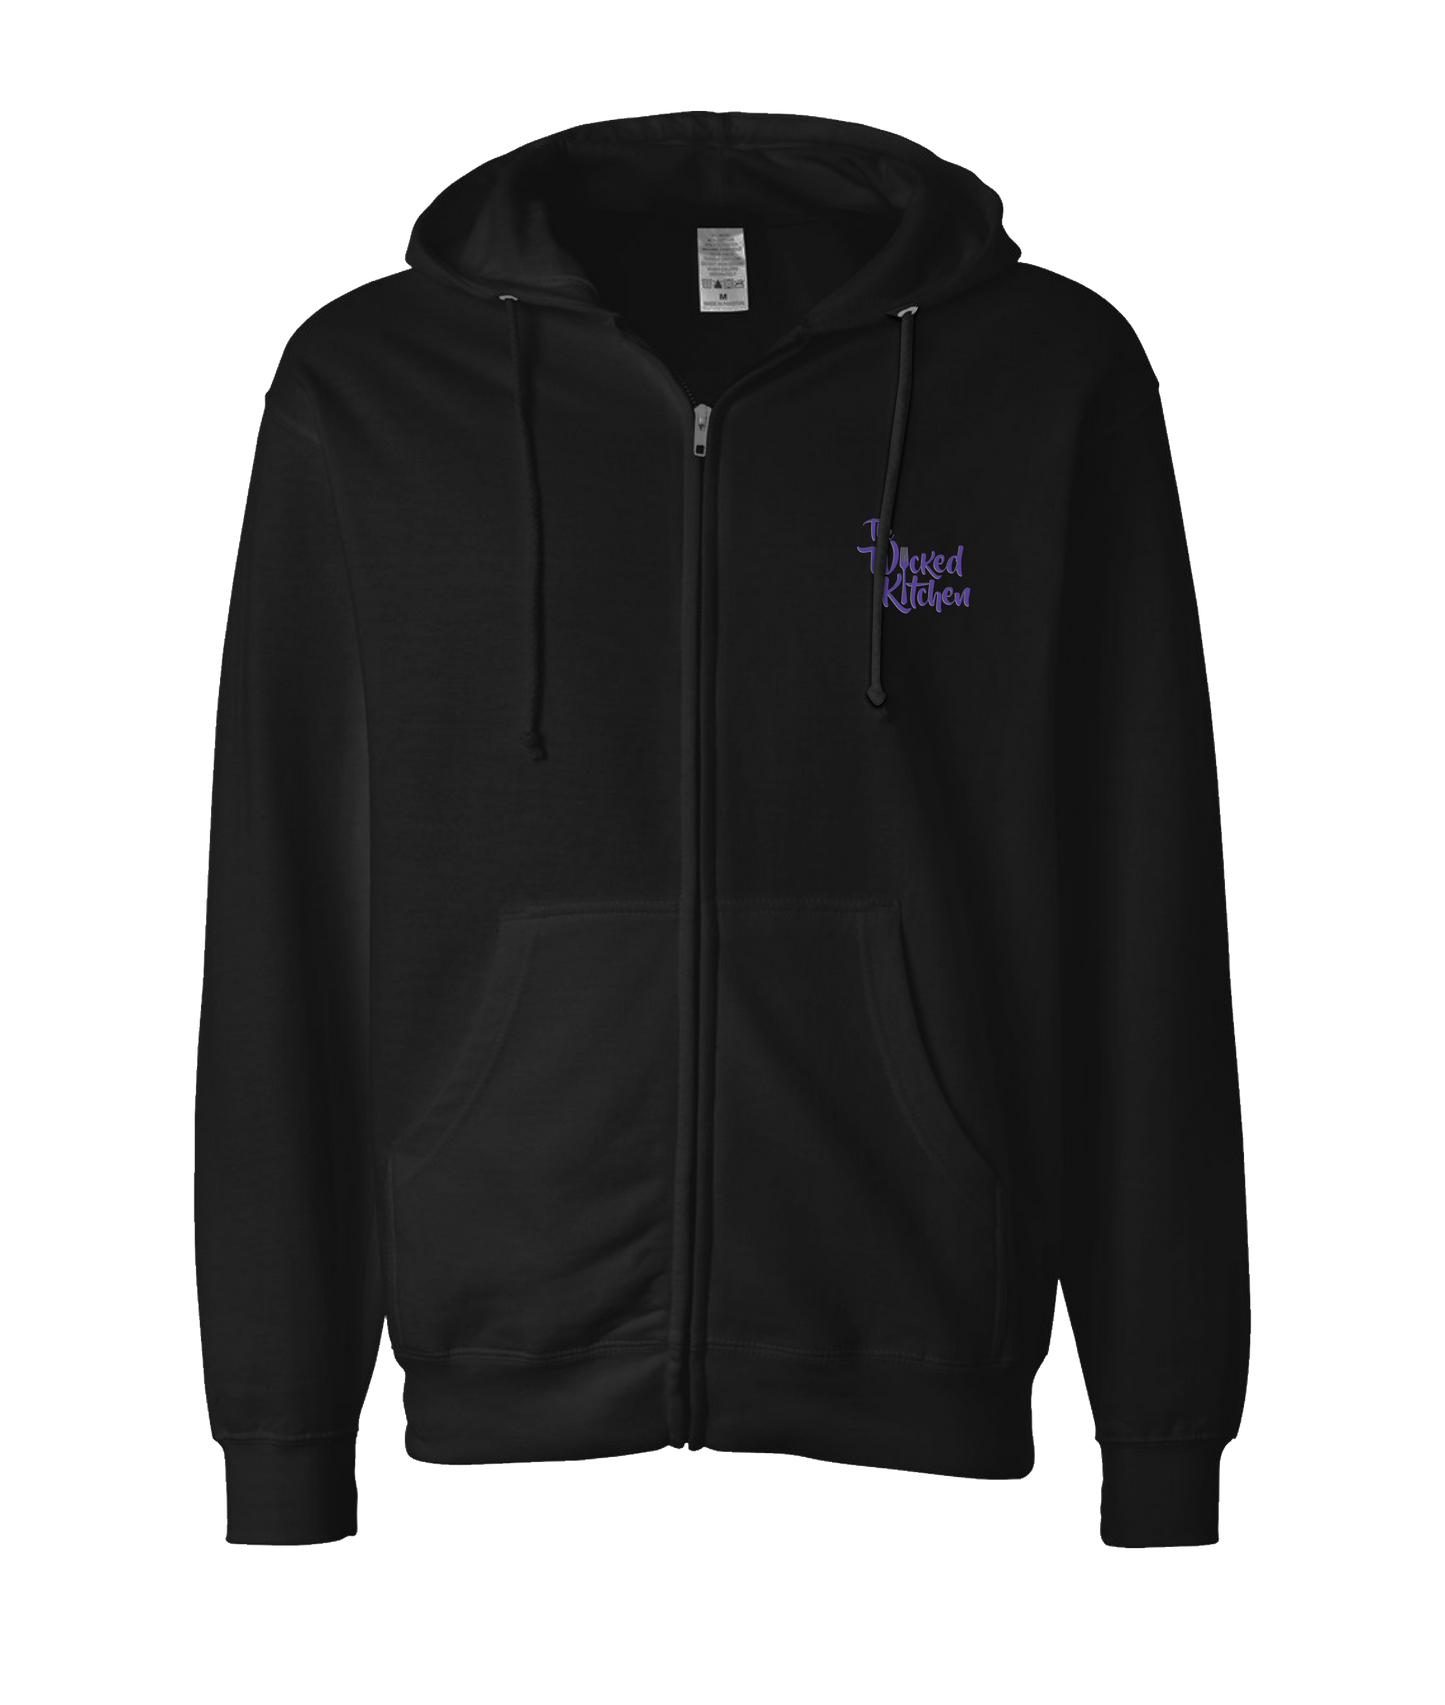 The Wicked Kitchen - 2 Sided Forks - Black Zip Up Hoodie